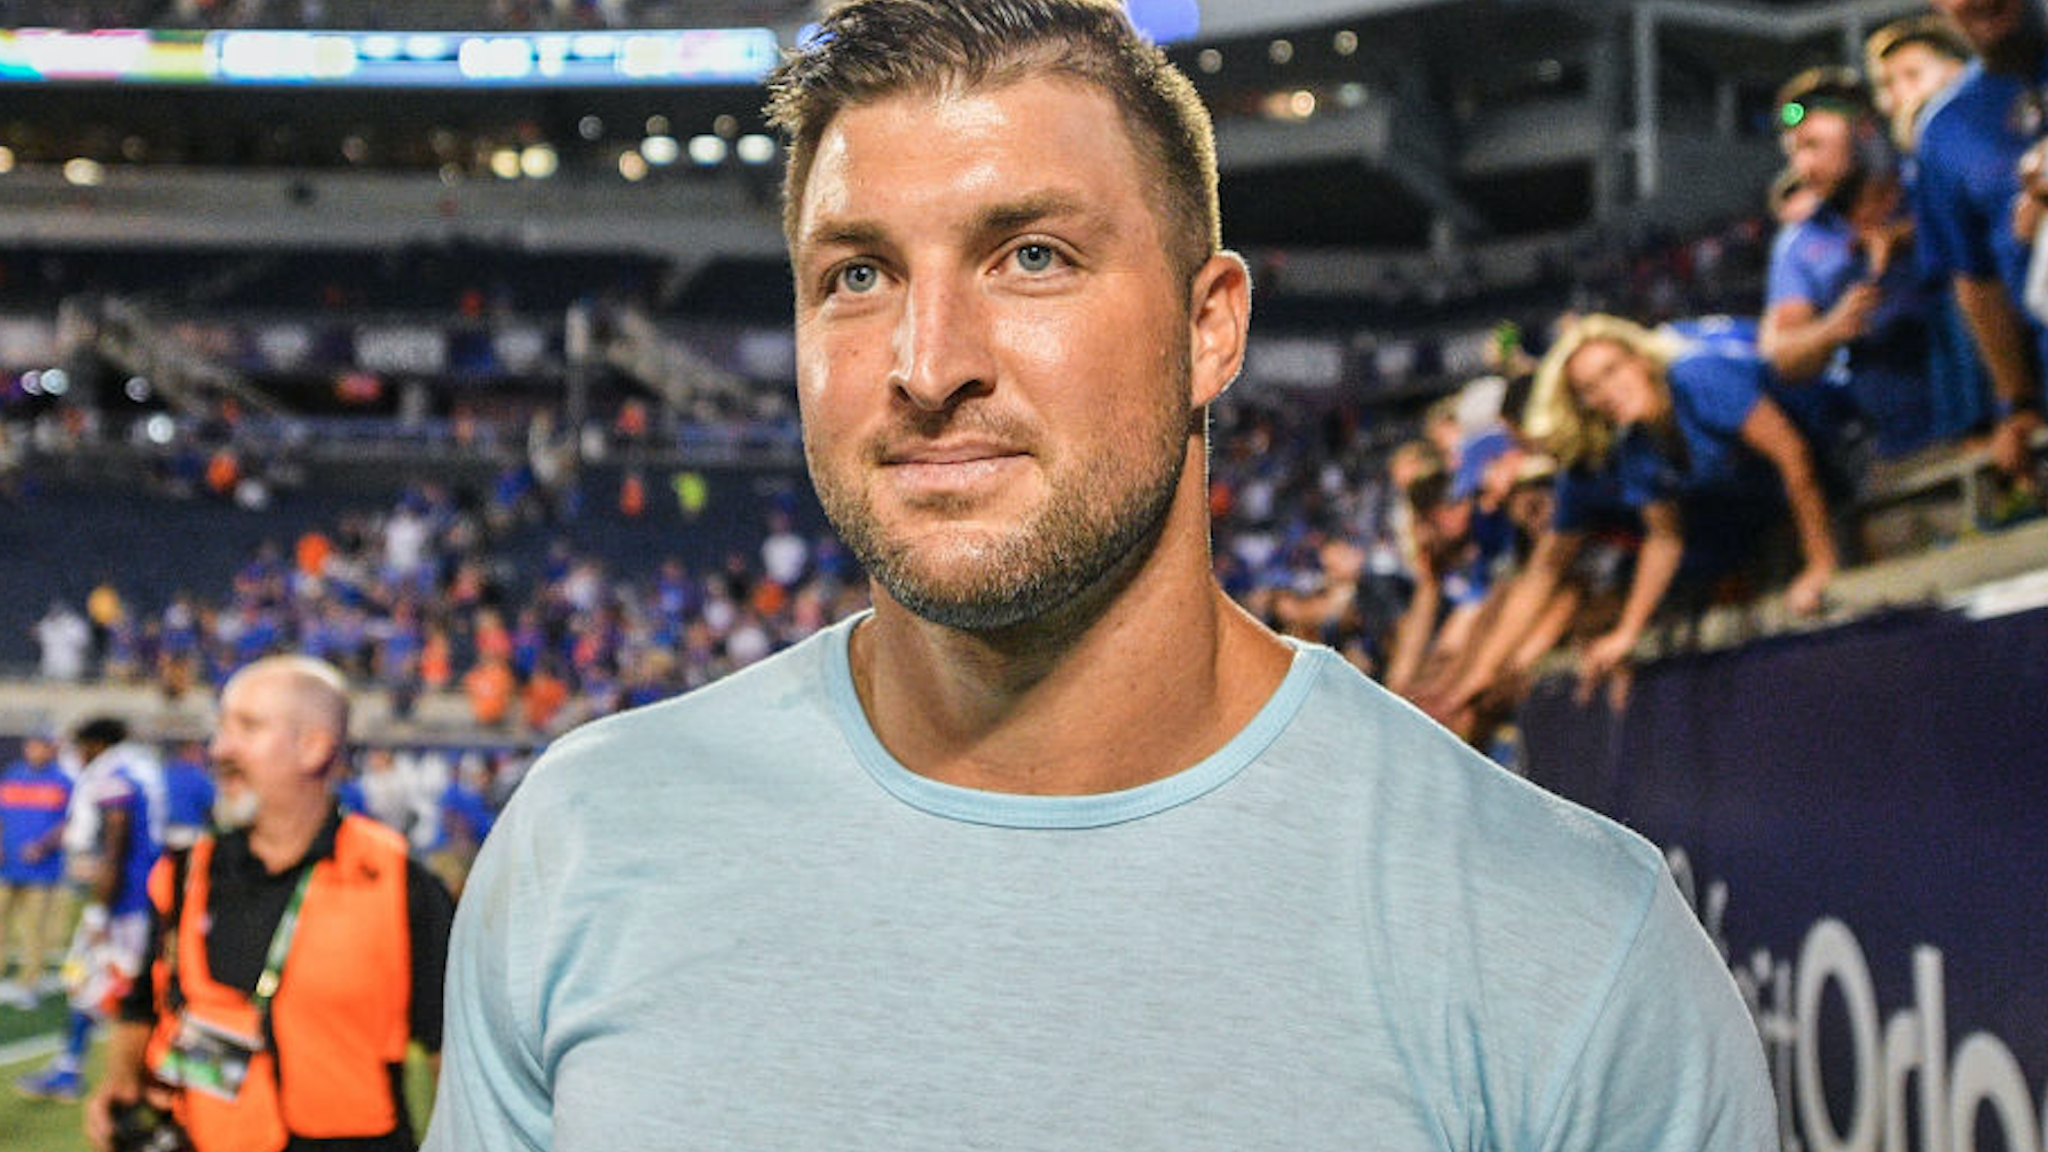 ORLANDO, FL - AUGUST 24: Florida Gators alumni Tim Tebow attends the game between the Florida Gators and the Miami Hurricanes in the Camping World Kickoff at Camping World Stadium on August 24, 2019 in Orlando, Florida.